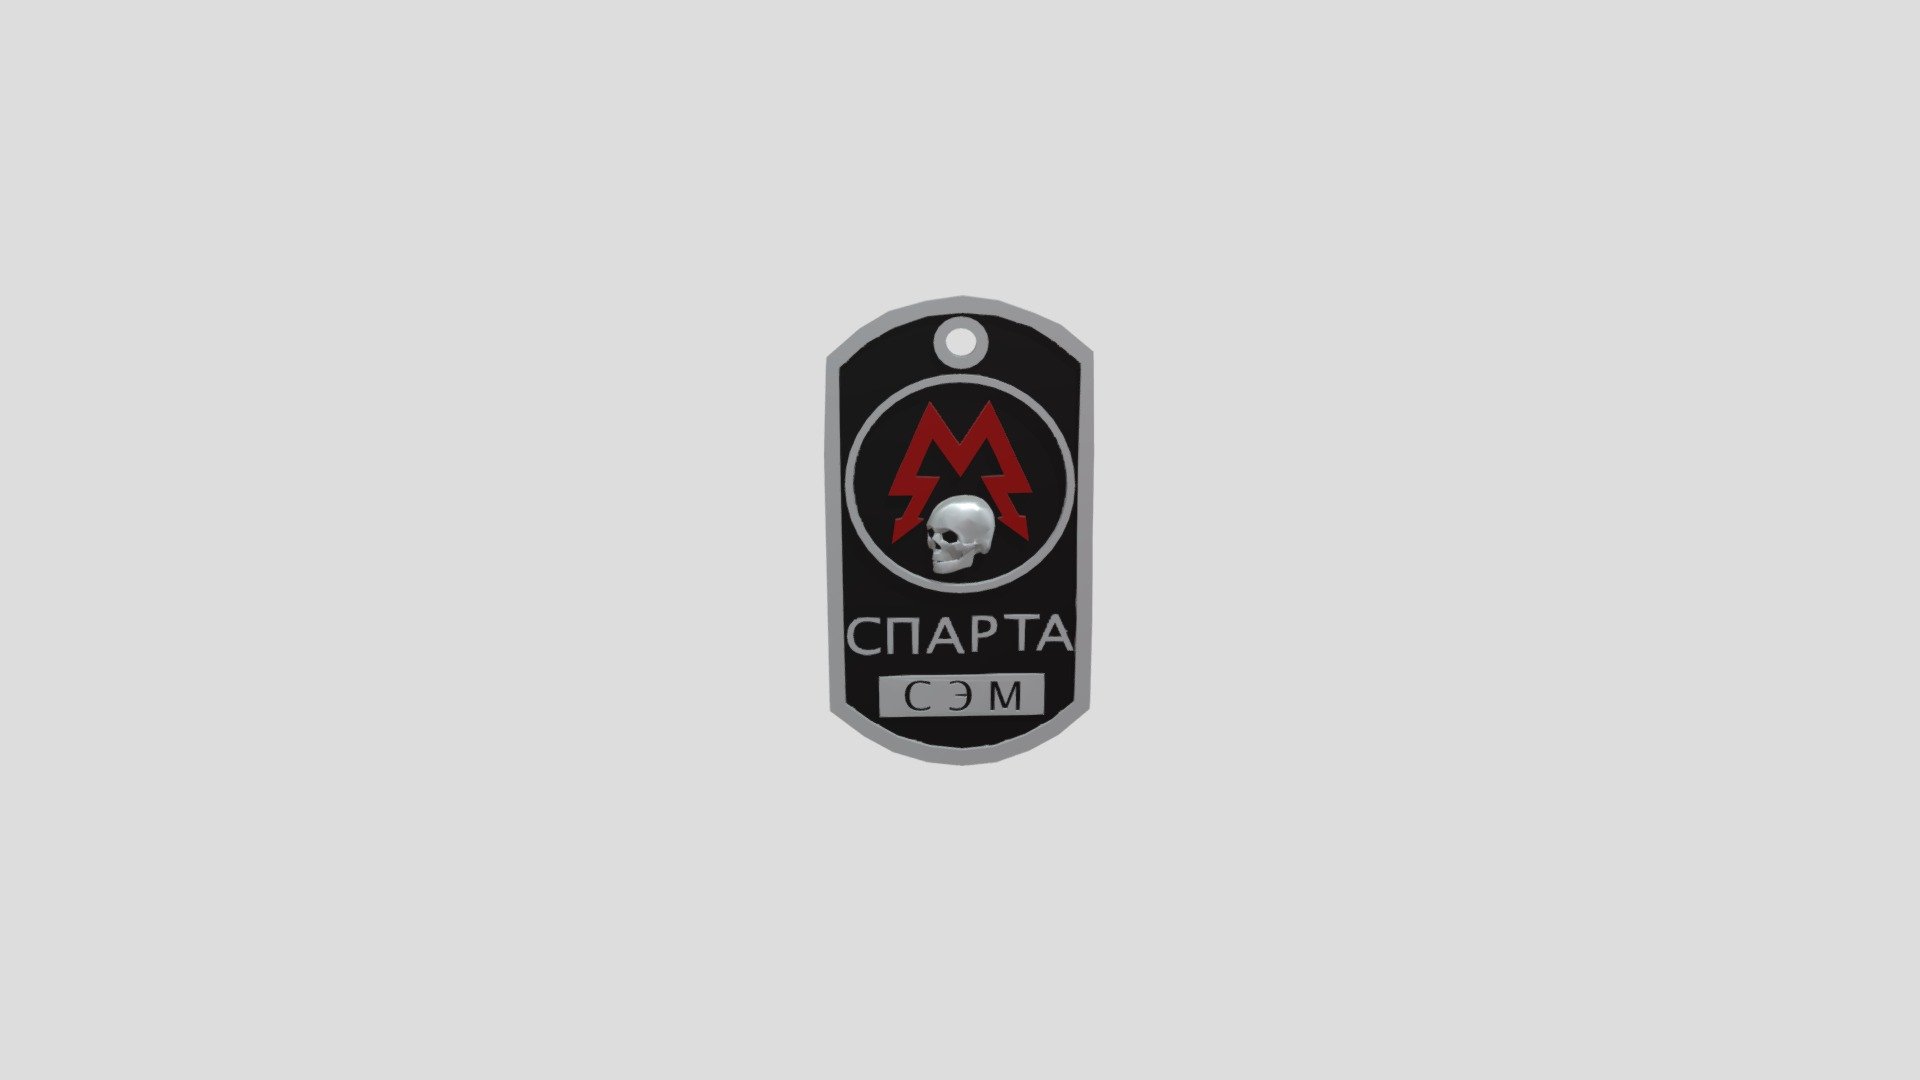 Sam's sparta badge from Metro Exodus. Made in Maya, automatic UV, textured in substance painter 3d model